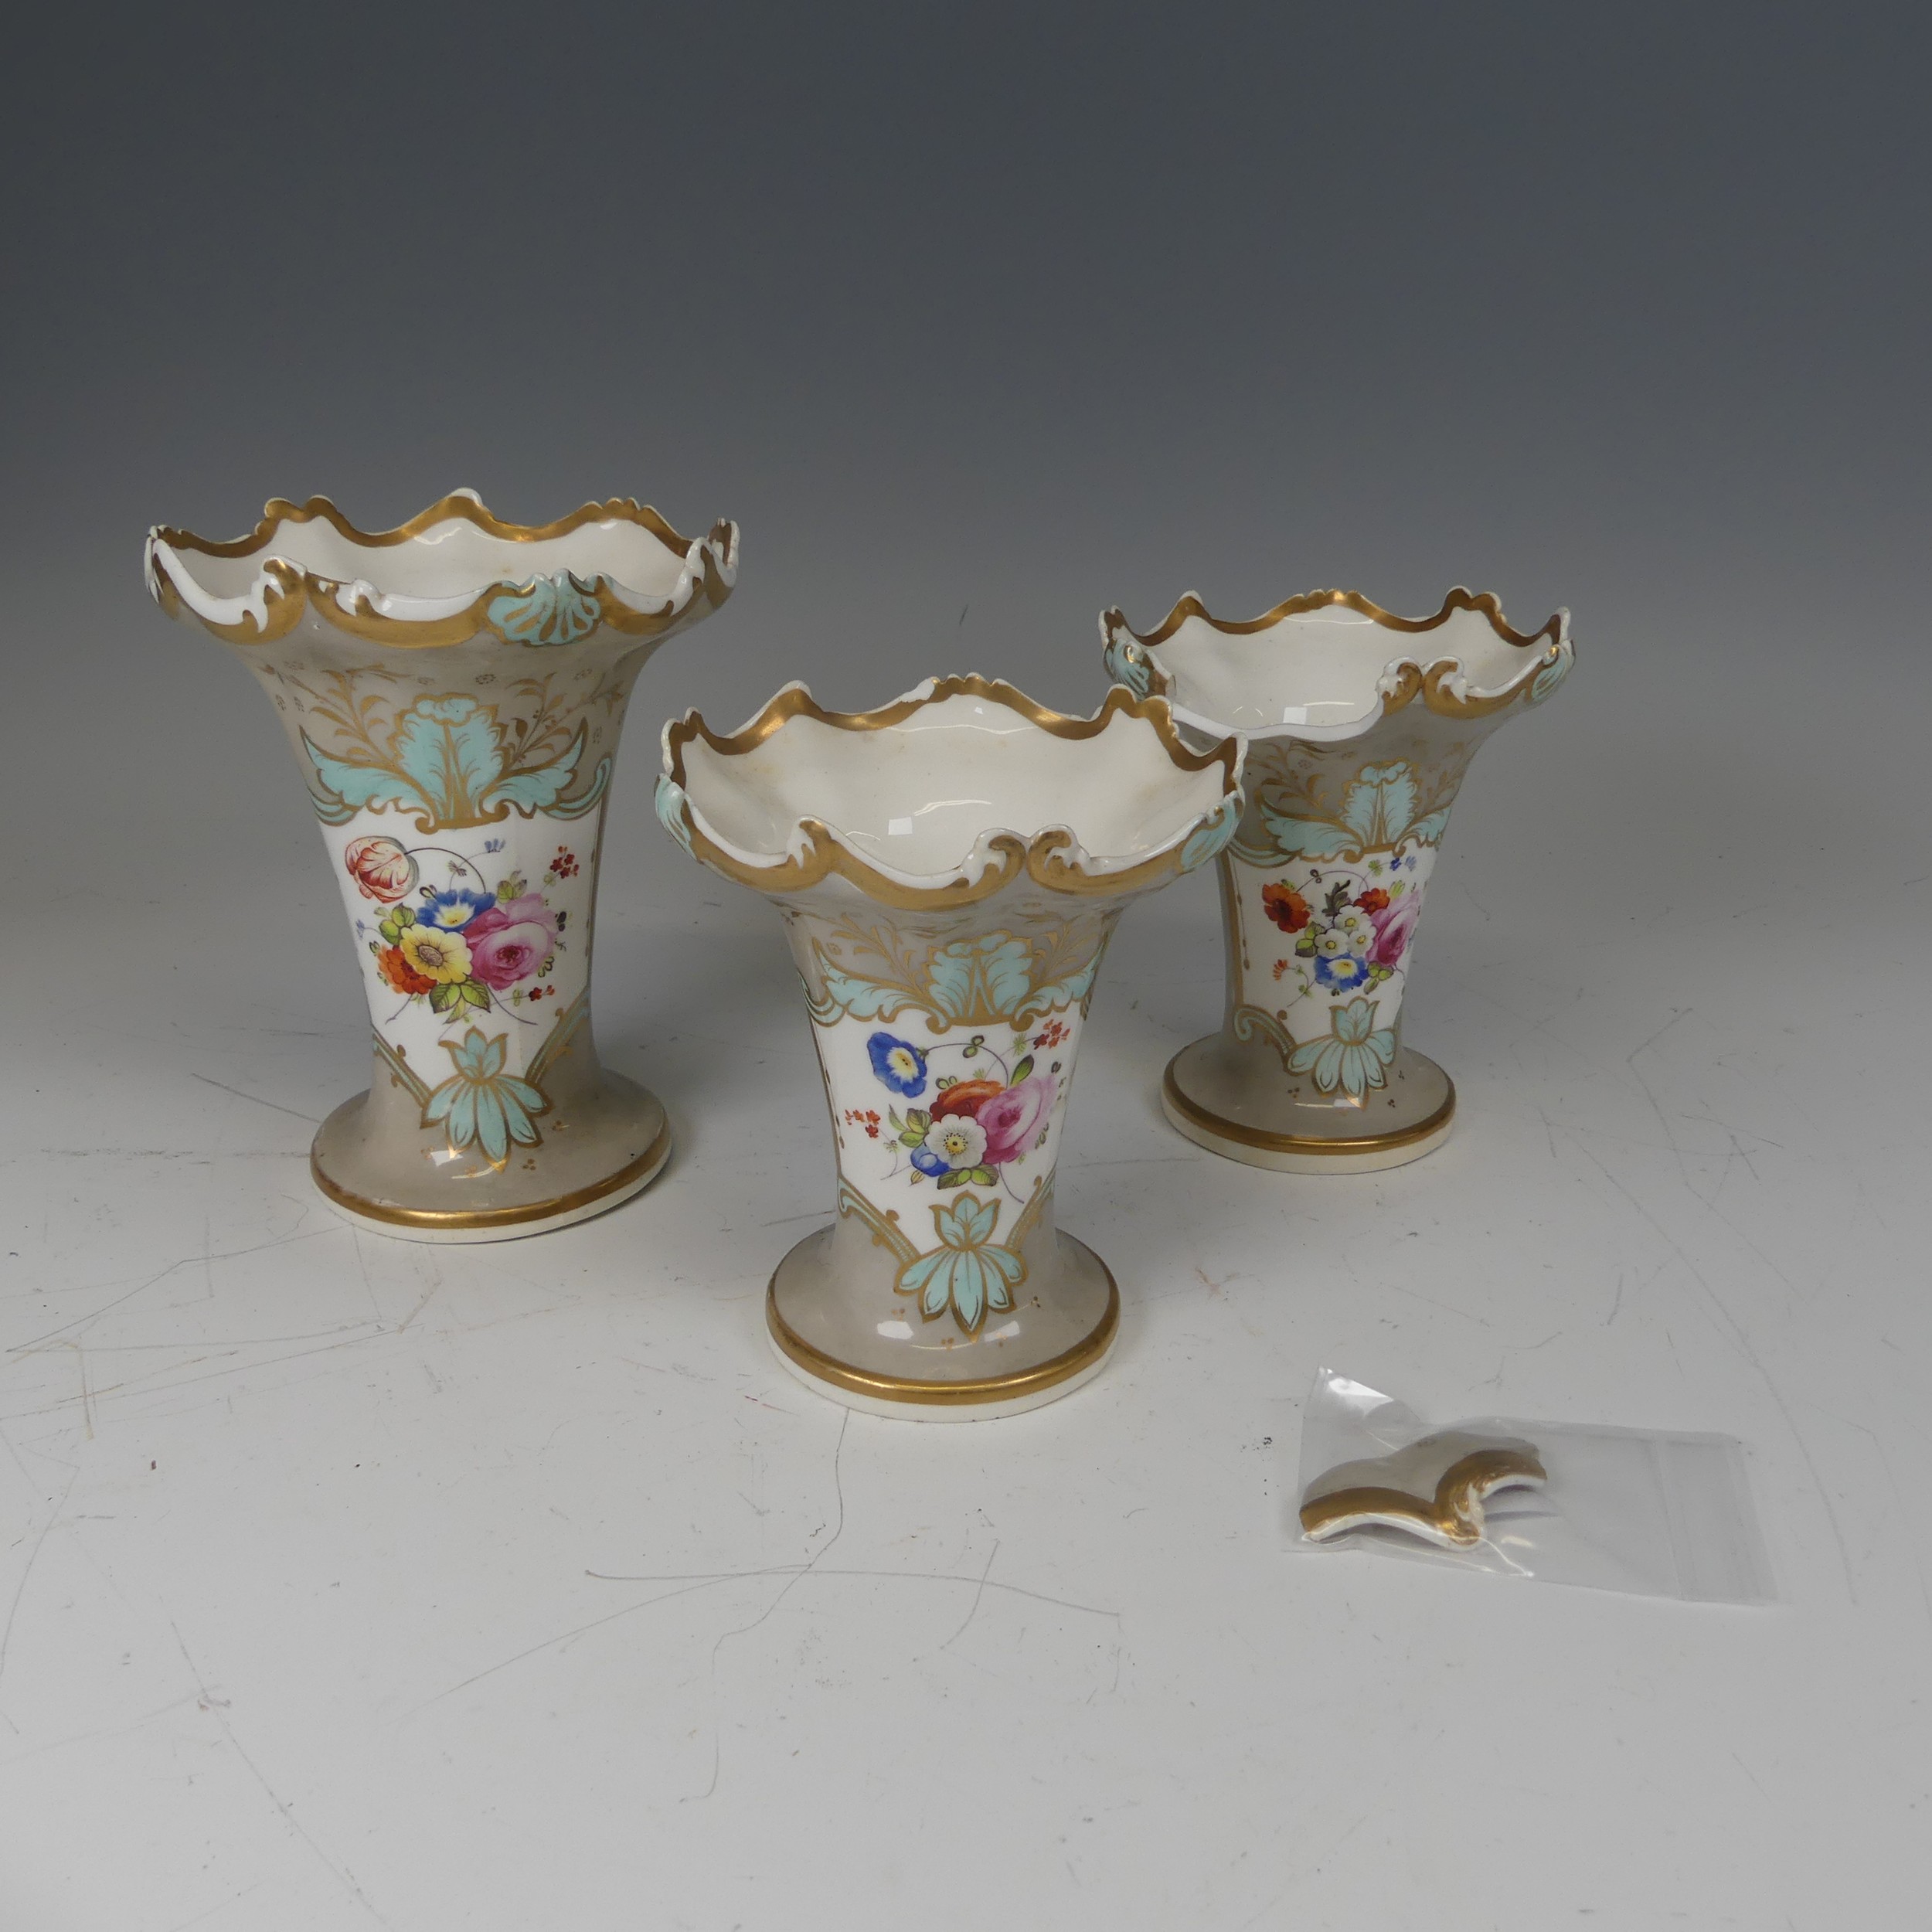 A trio of Samuel Alcock porcelain Vases, decorated in light grey ground with cartouches containing